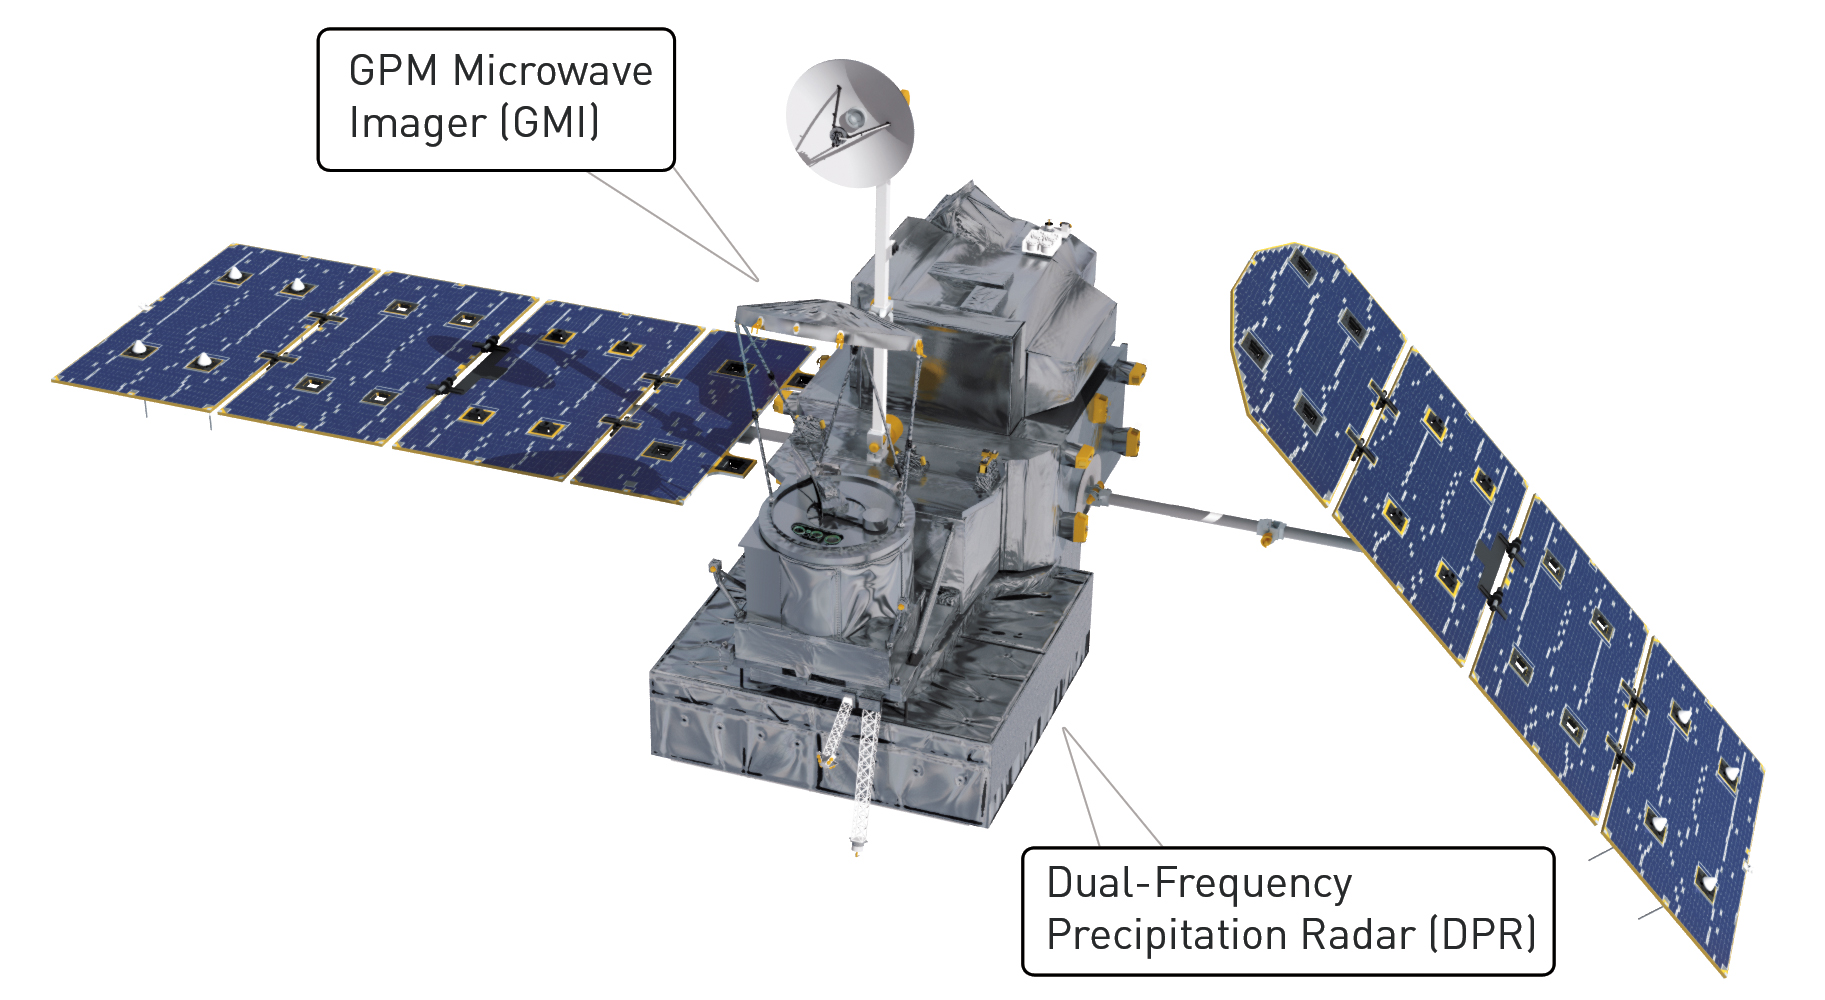 GPM Core Observatory Diagram showing DPR and GMI instruments